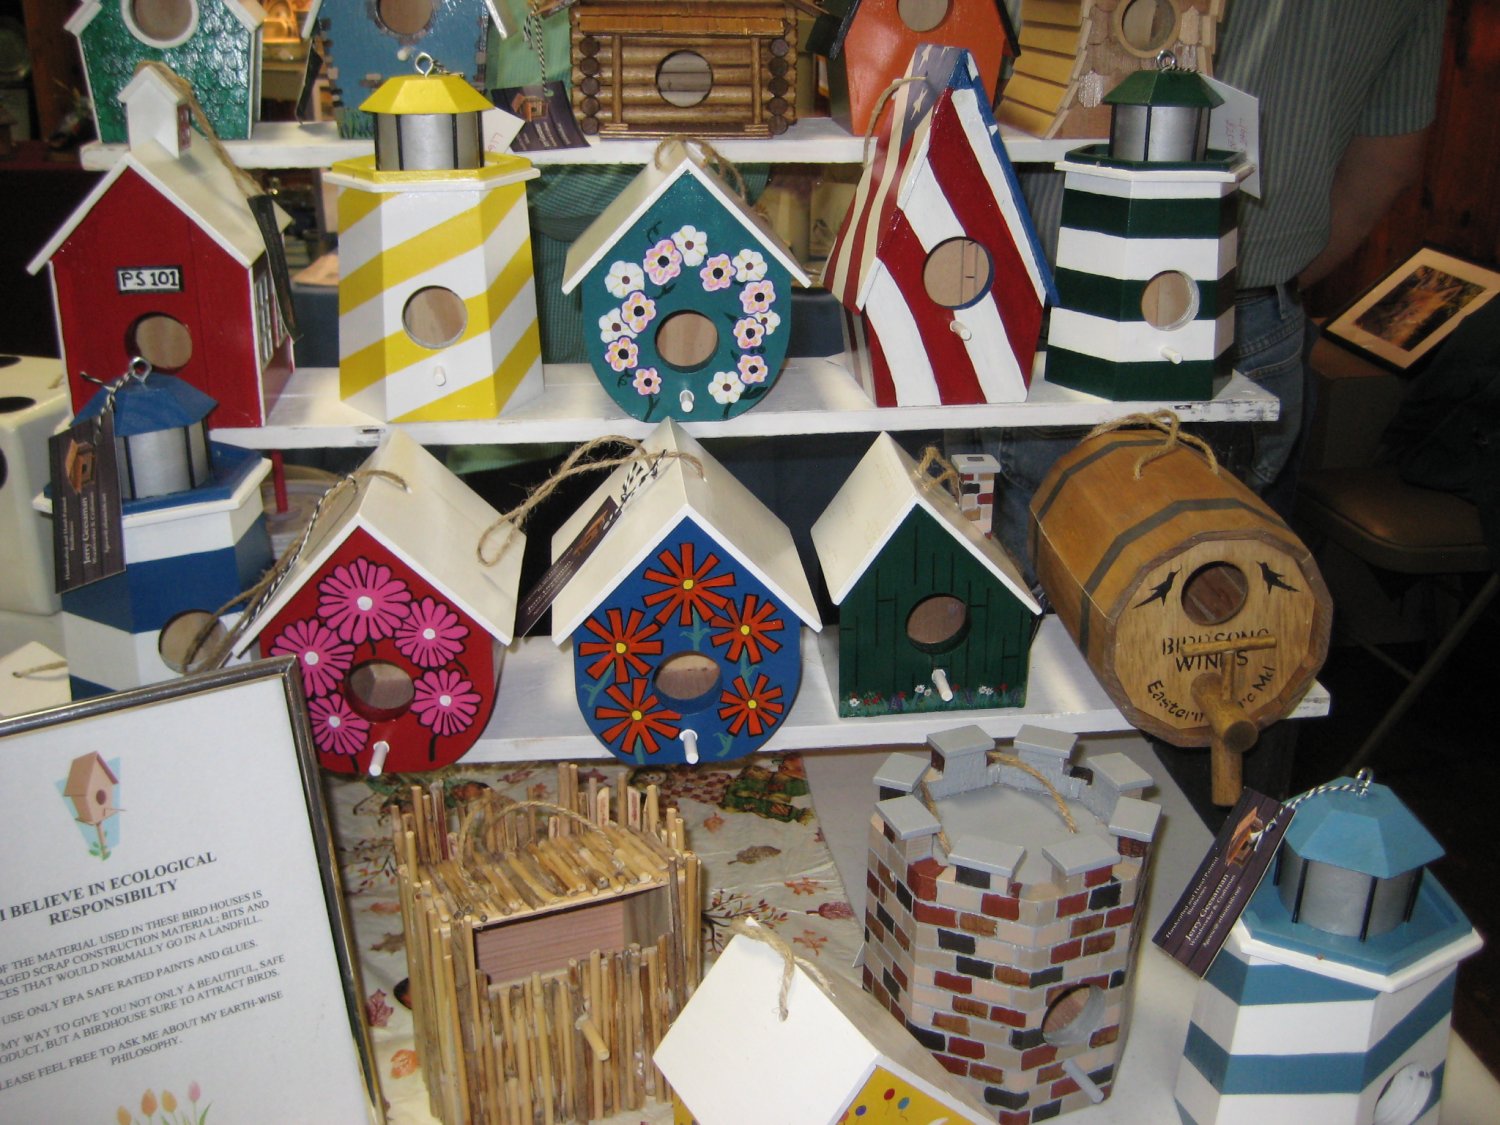  Some of Jerry and Brenda Geesaman's handcrafted, painted bird houses.  